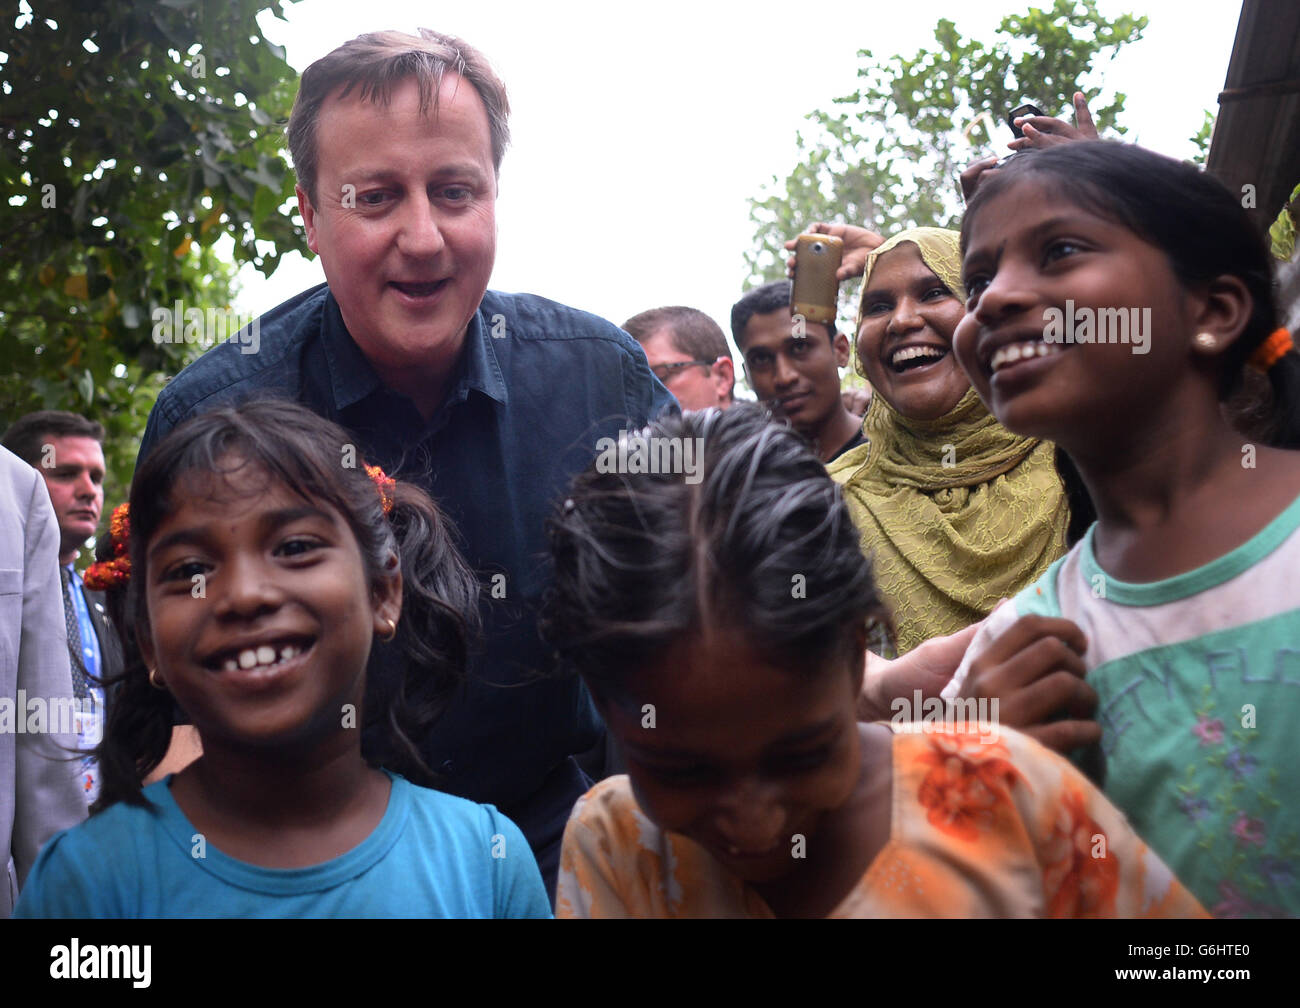 Prime Minister David Cameron meets staff at the Uthayan newspaper in Jaffna, northern Sri Lanka, which was frequently attacked by government forces during the 26 year long civil war. Stock Photo